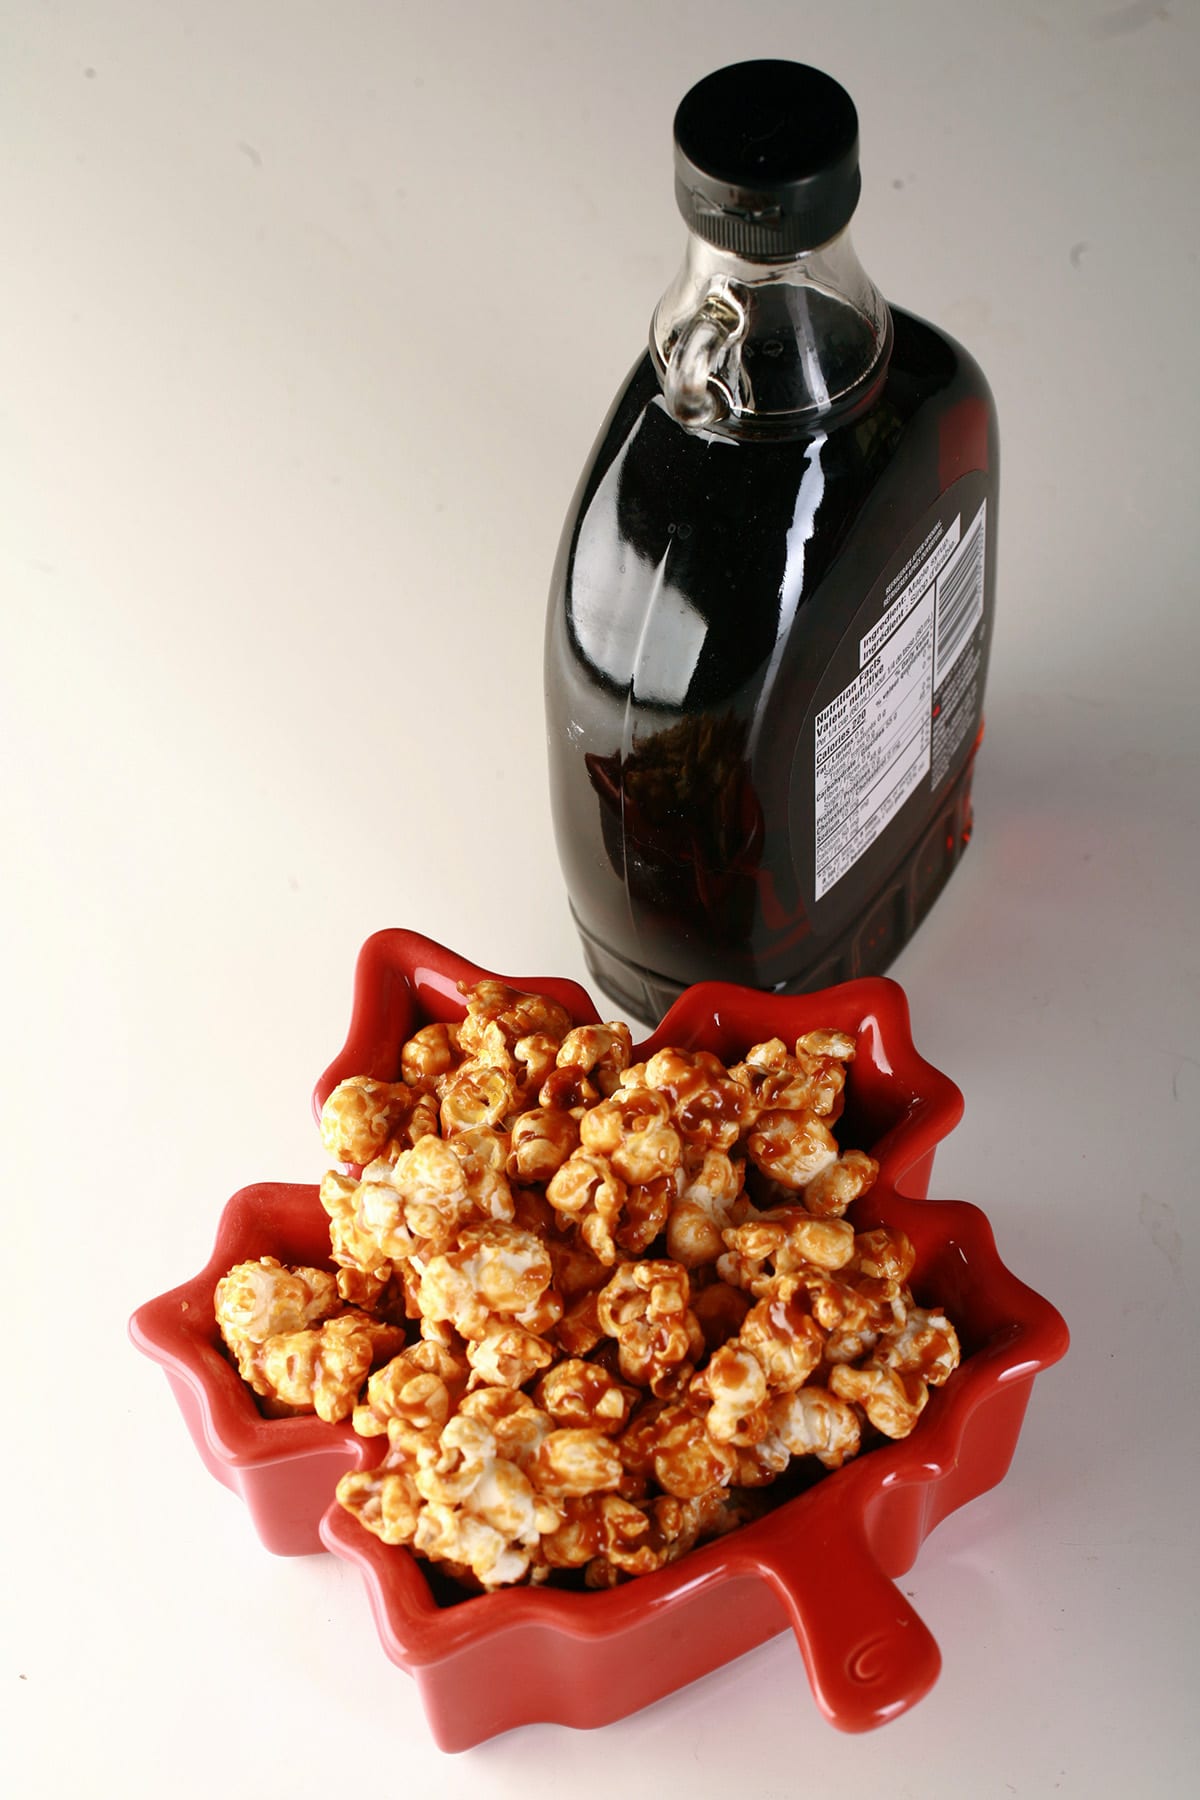 A bowl of maple syrup caramel poporn in front of a bottle of maple syrup.